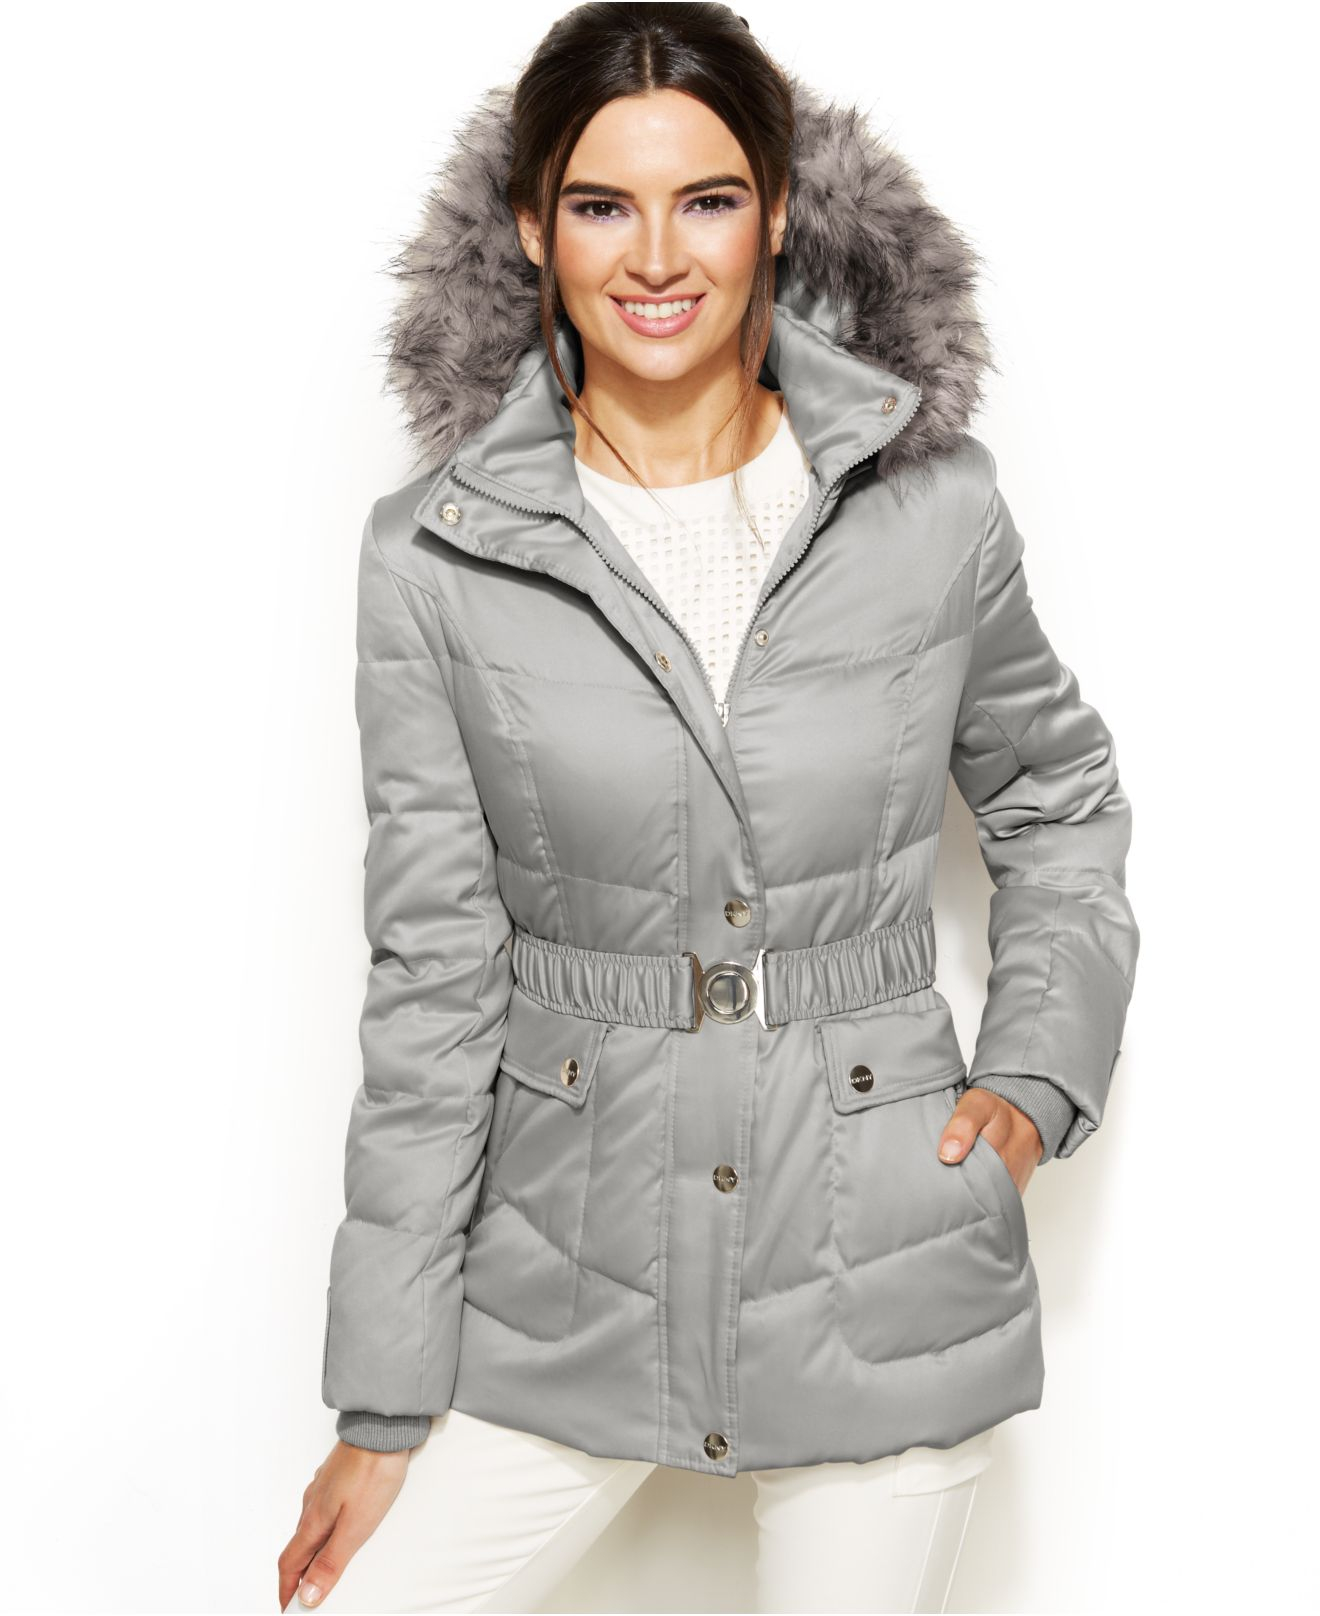 Lyst - Dkny Petite Hooded Faux-Fur-Trim Belted Down Puffer Coat in Gray